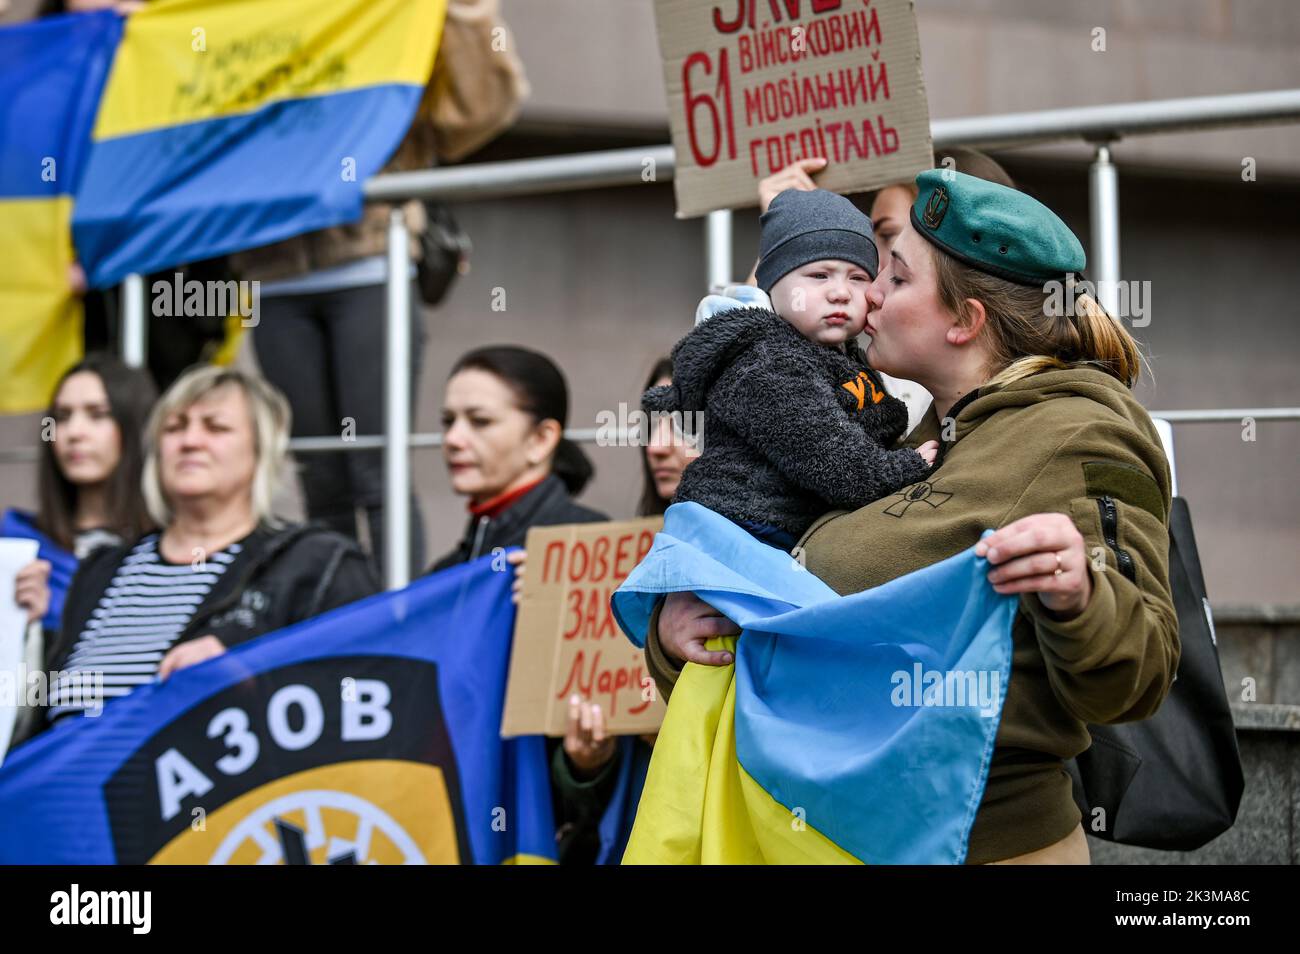 Non Exclusive: ZAPORIZHZHIA, UKRAINE - SEPTEMBER 25, 2022 - A servicewoman kisses a child during the Bring Back Our Heroes rally calling for the relea Stock Photo